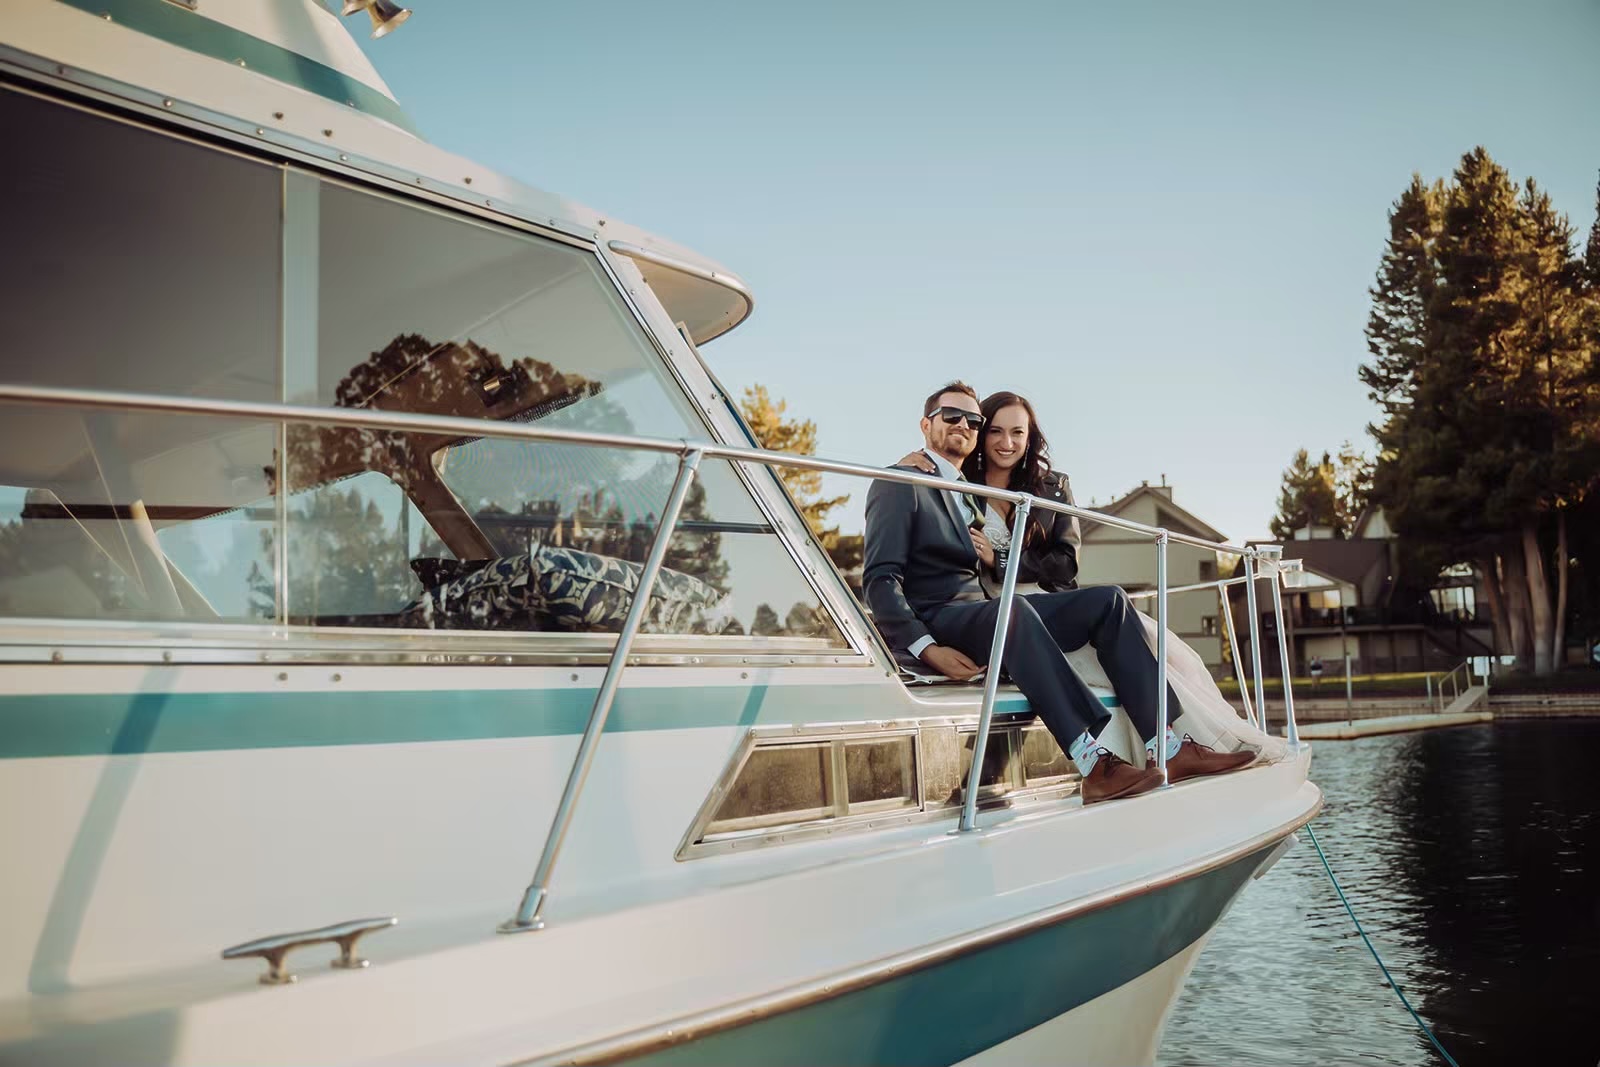 Bride and groom sit on boat together